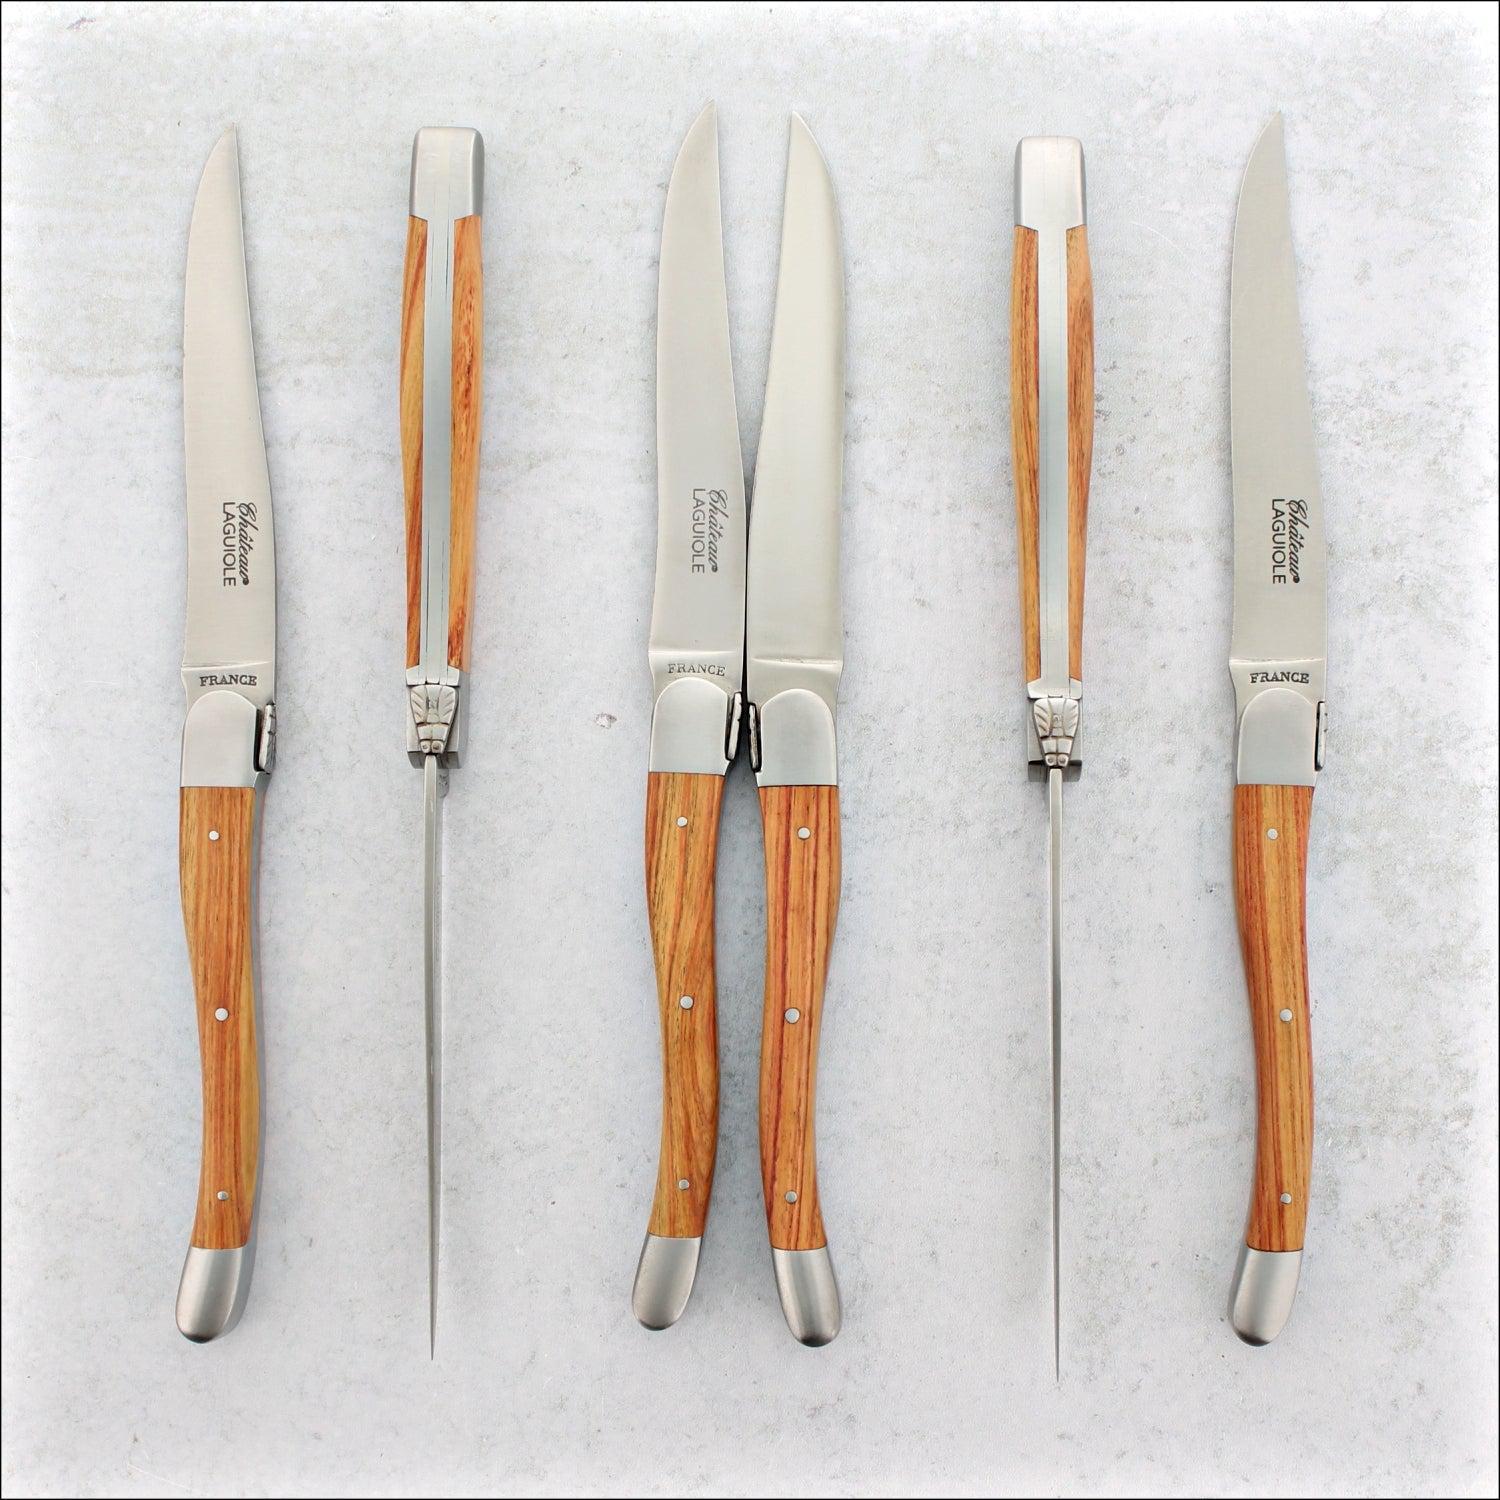 FRENCH HOME Laguiole Connoisseur Rosewood Steak Knives - Set of 4